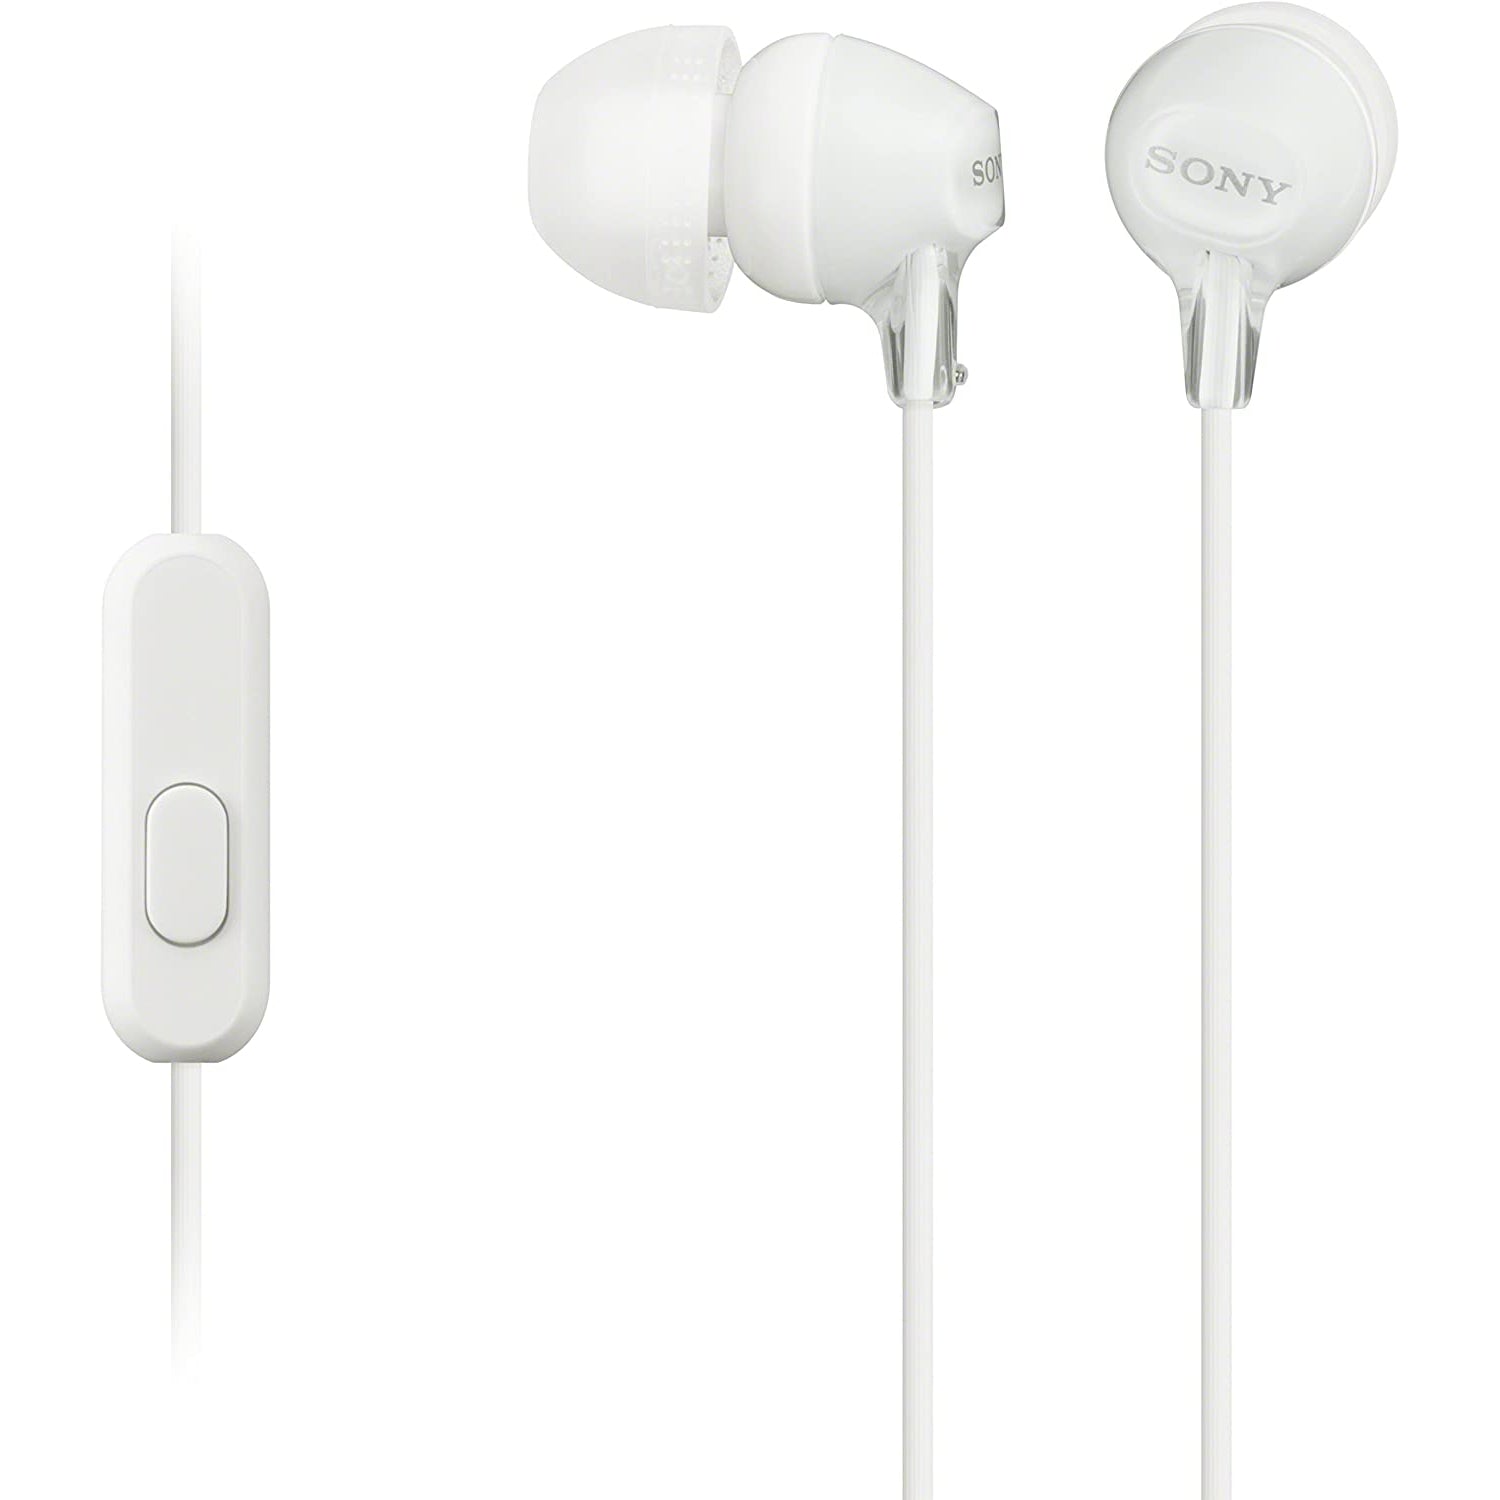 Sony MDR-EX15AP In-Ear Headphones with Mic/Remote - White - Refurbished Pristine